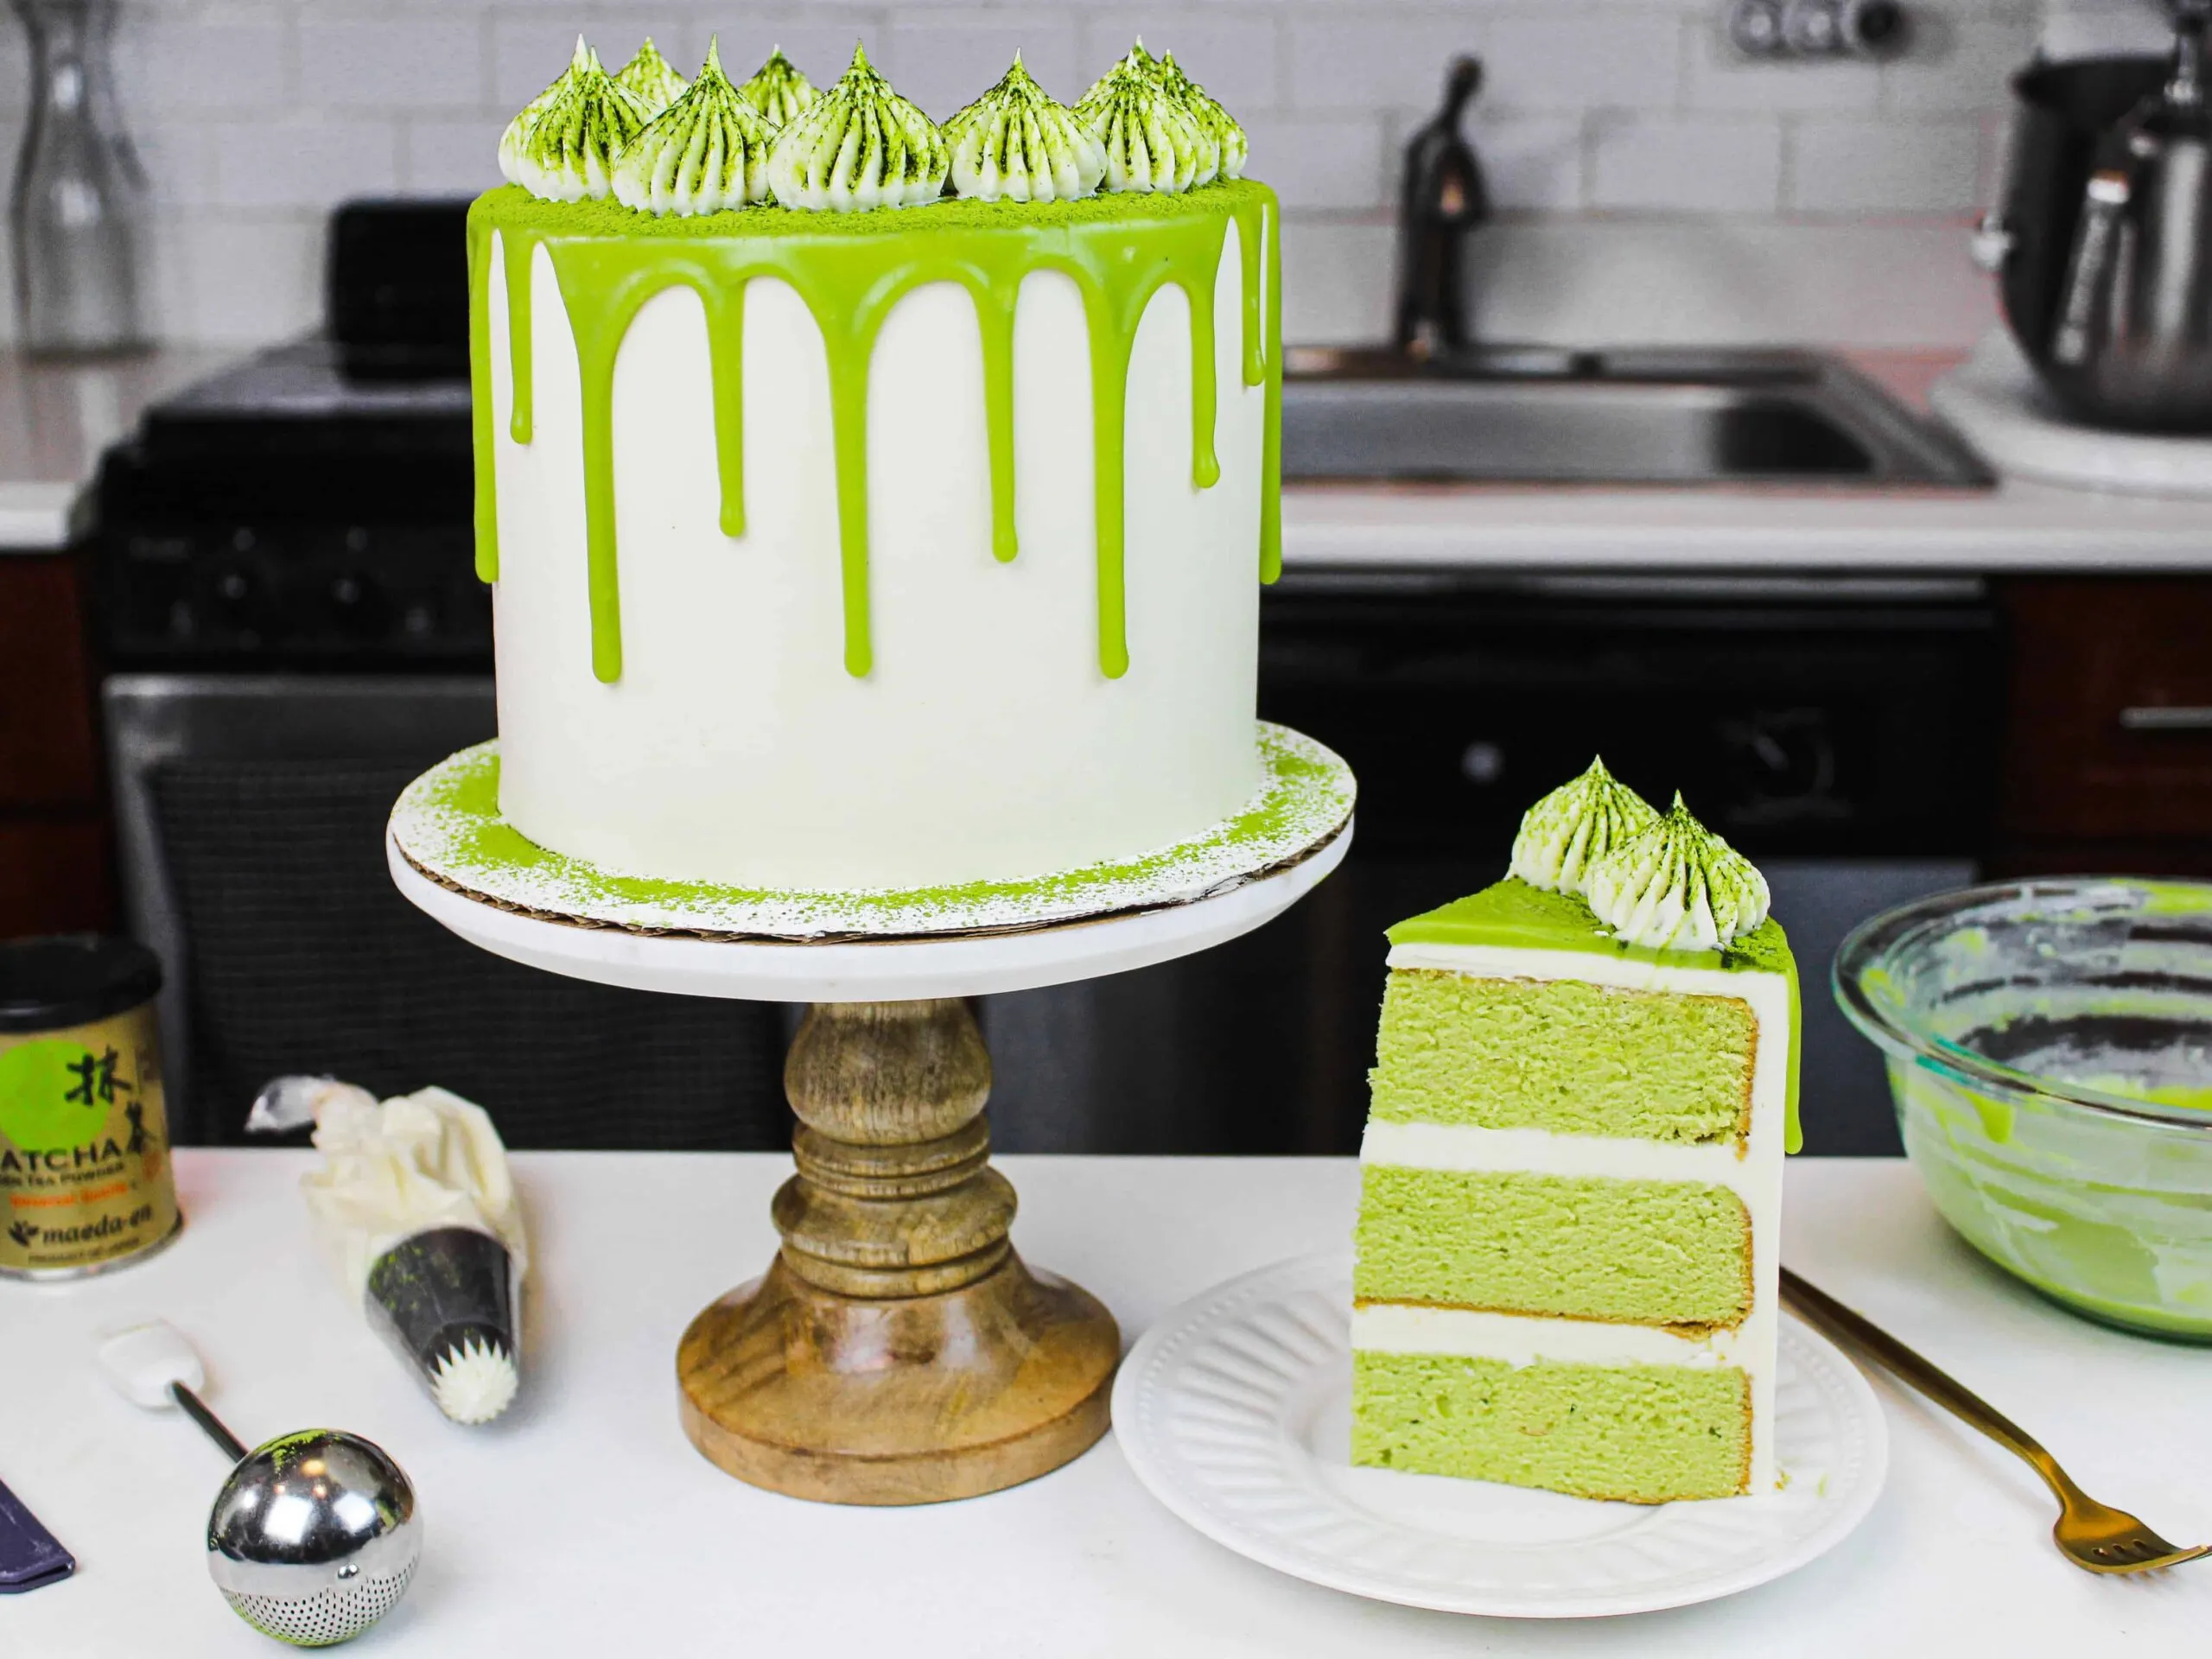 image of a matcha cake, with a slice placed on a plate to show how fluffy and delicious this matcha cake recipe is